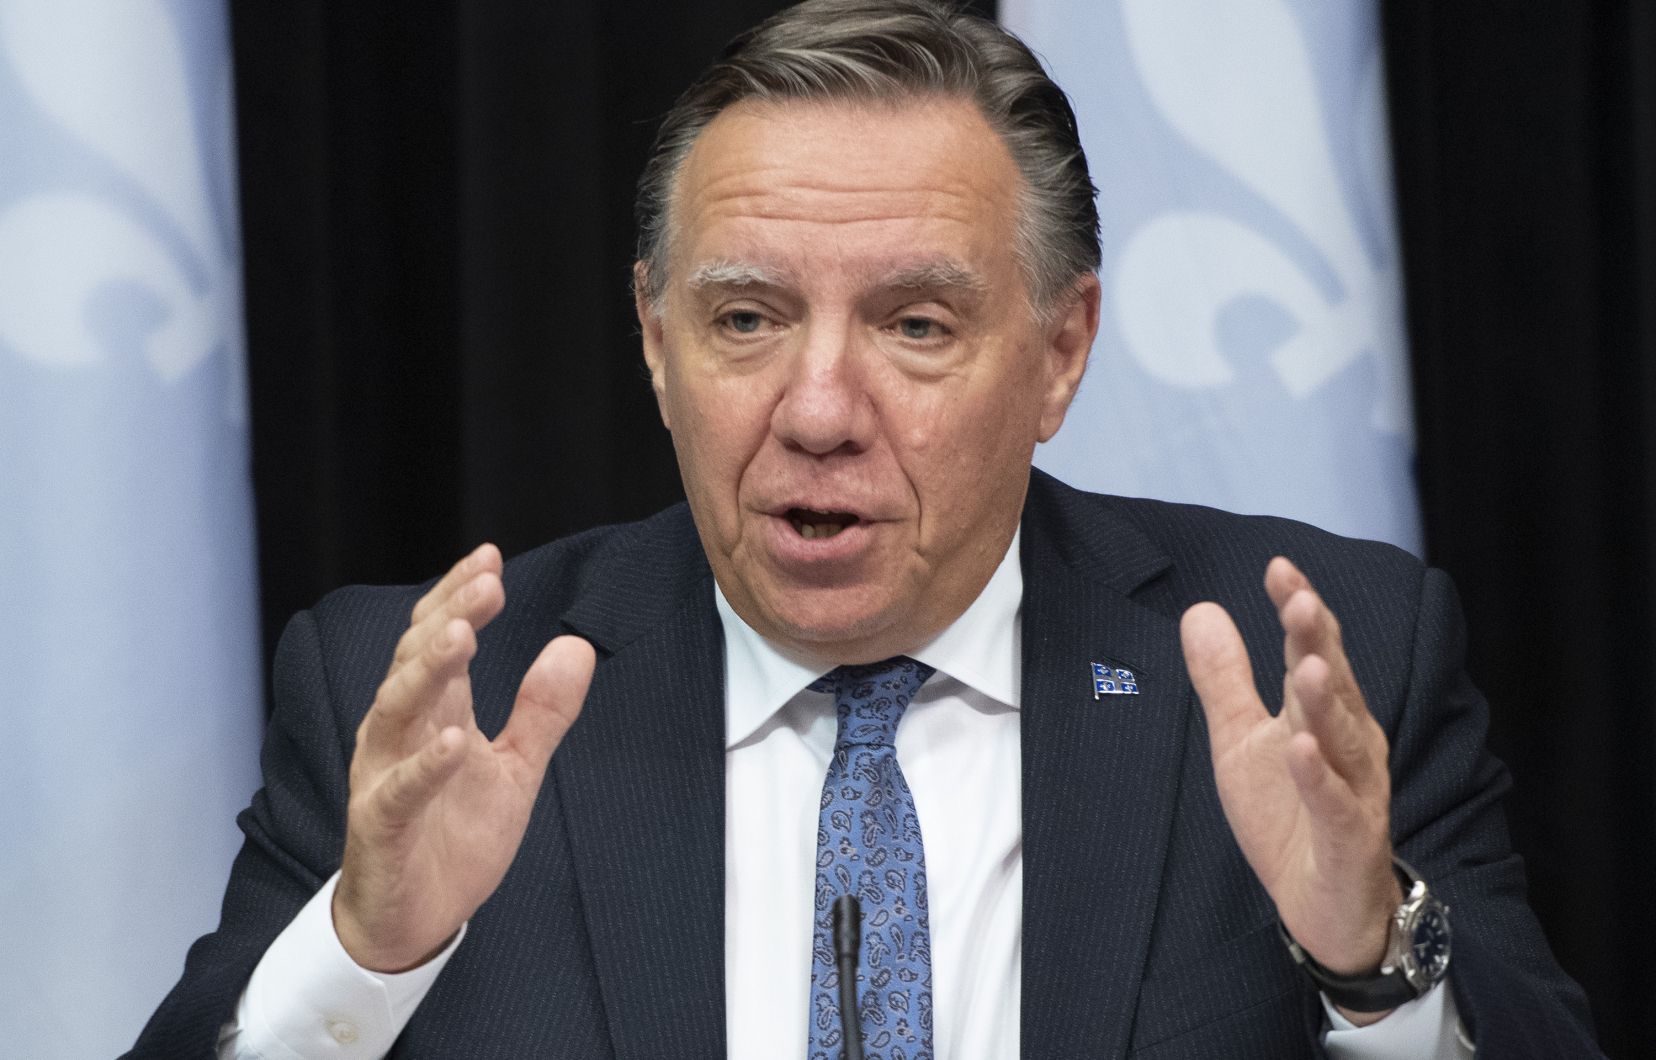 Francois Legault says furloughing for boarding school victims will hurt 'productivity'

